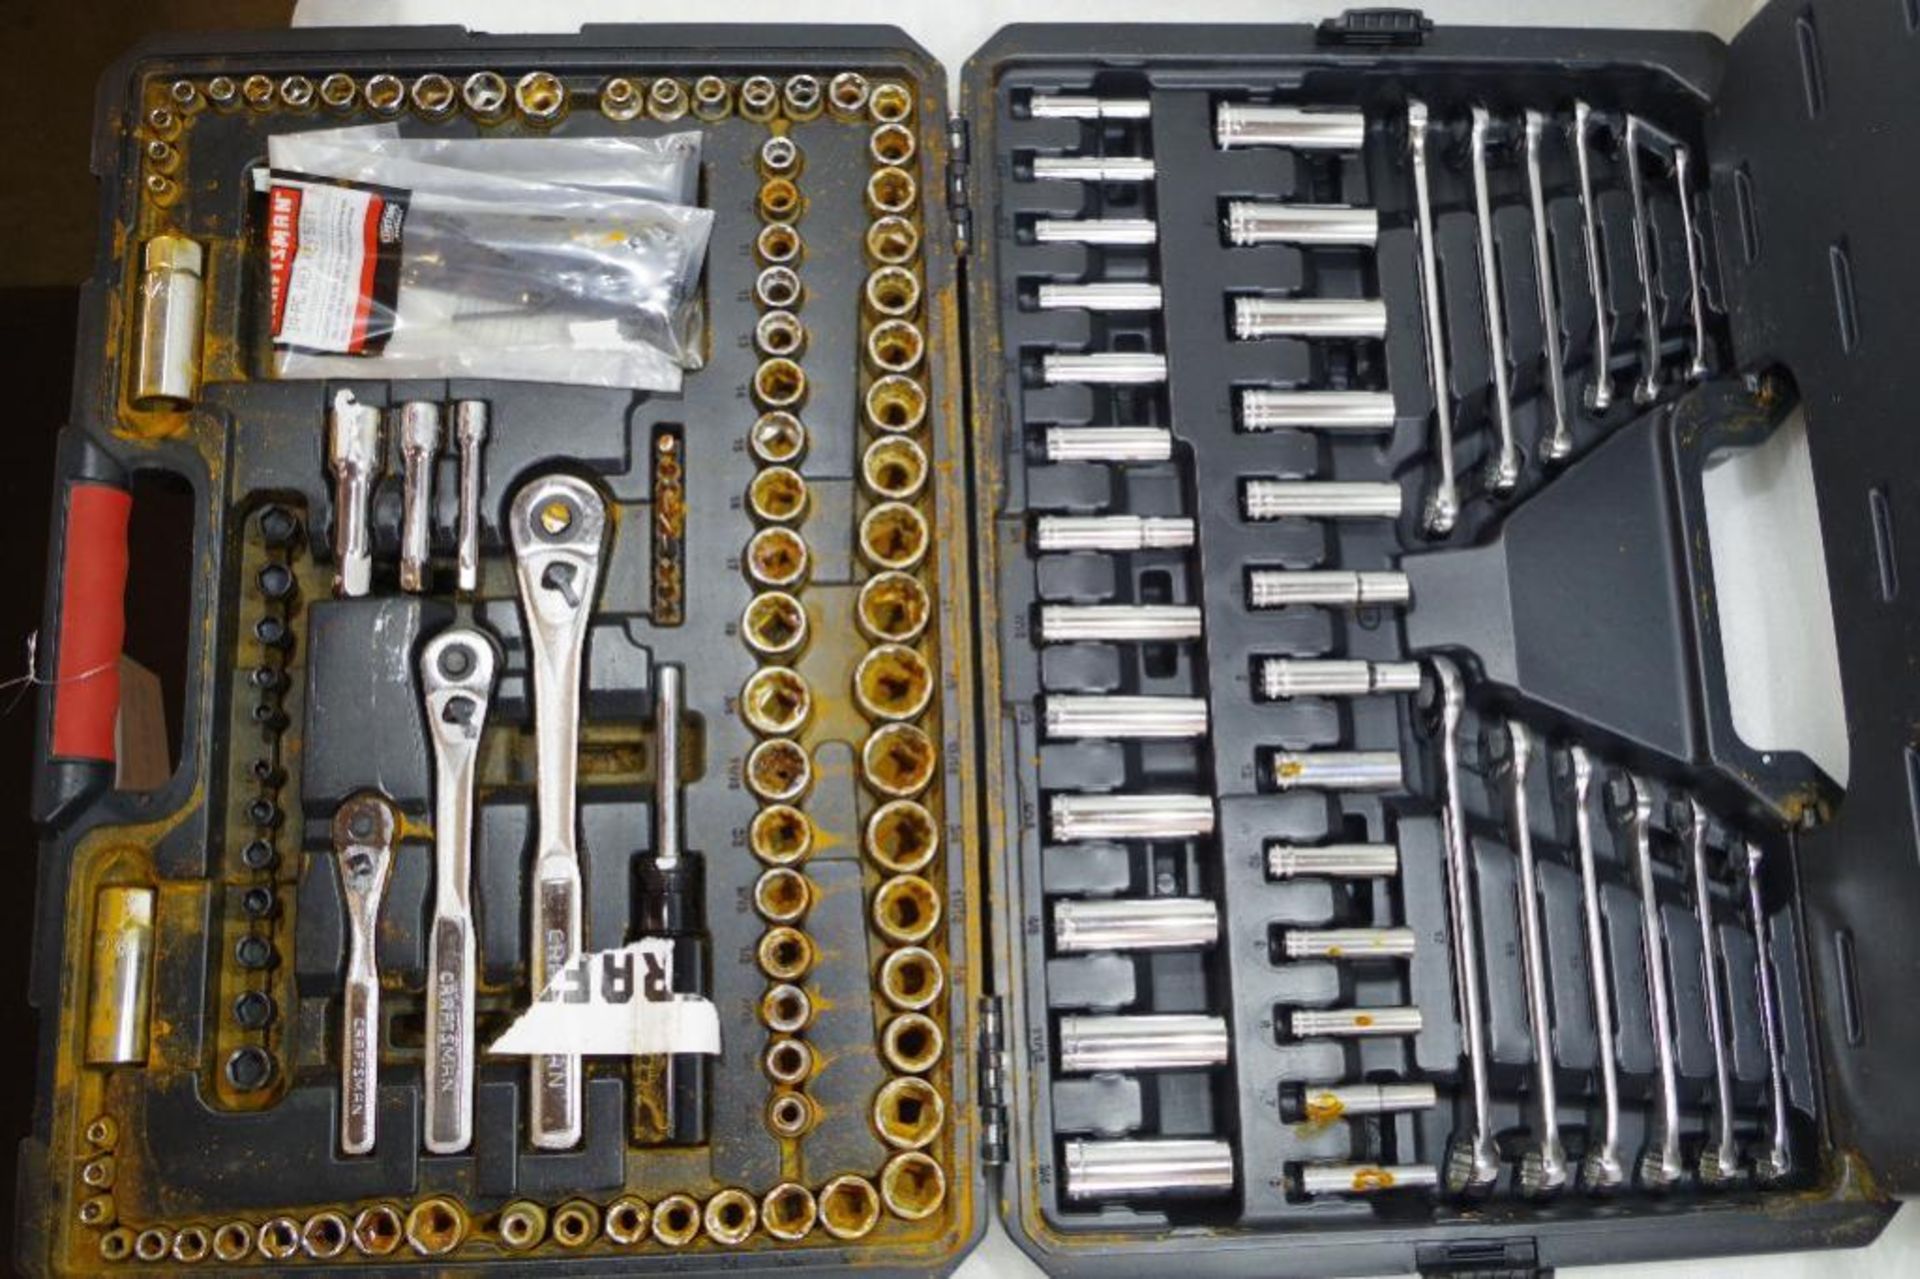 CRAFTSMAN 168-Piece Mechanics Tool Set (appears complete but heavily rusted)